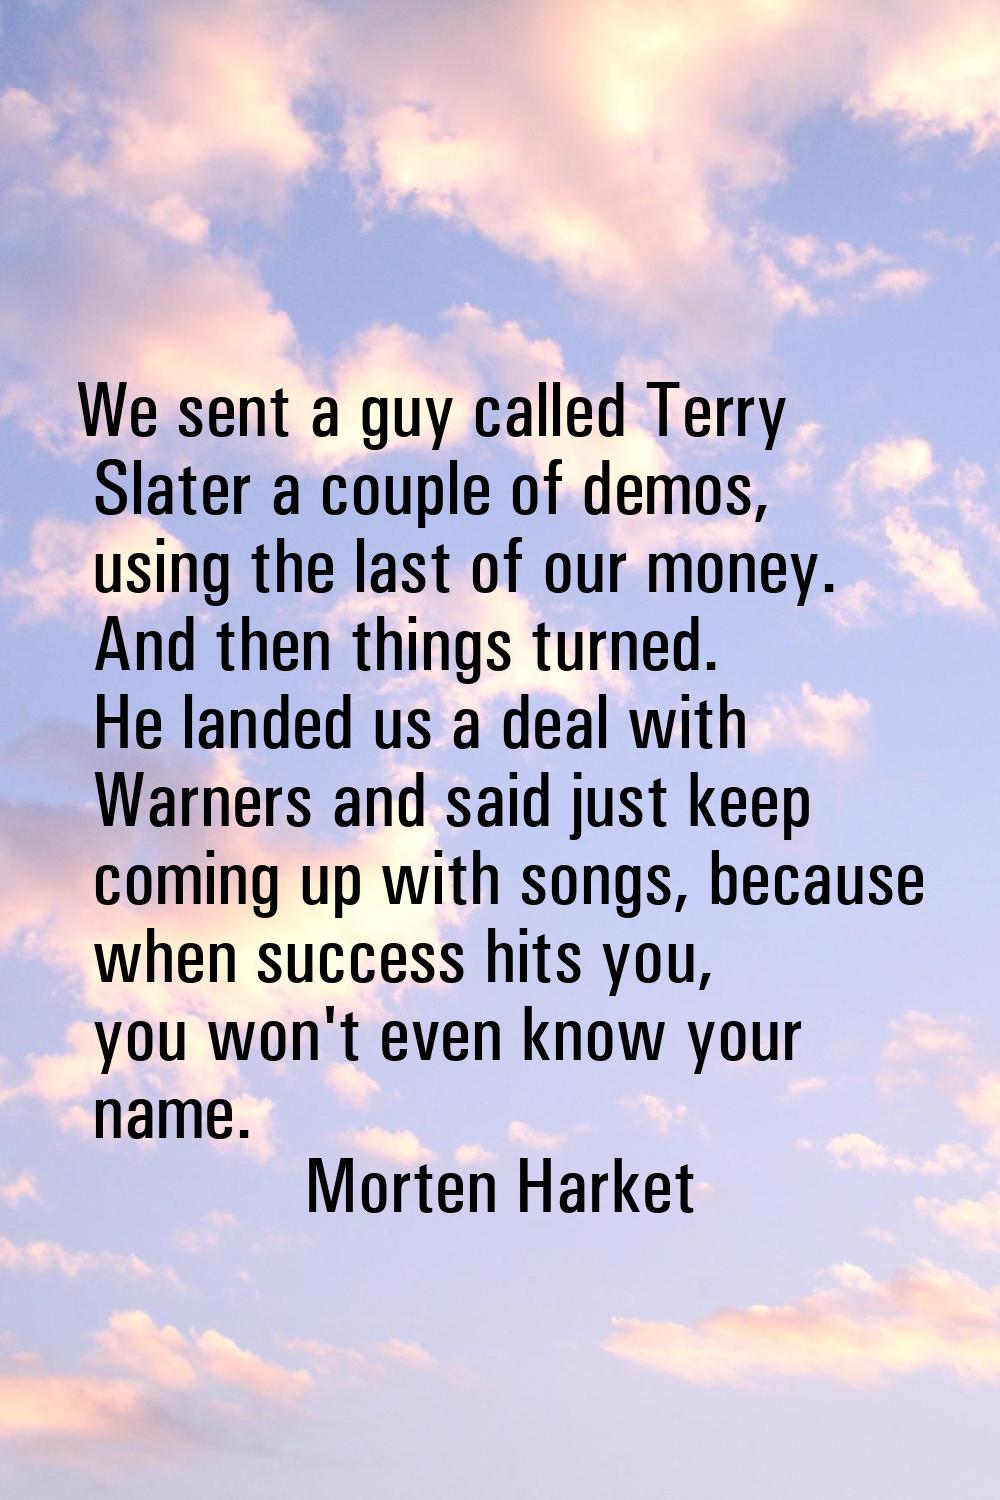 We sent a guy called Terry Slater a couple of demos, using the last of our money. And then things t